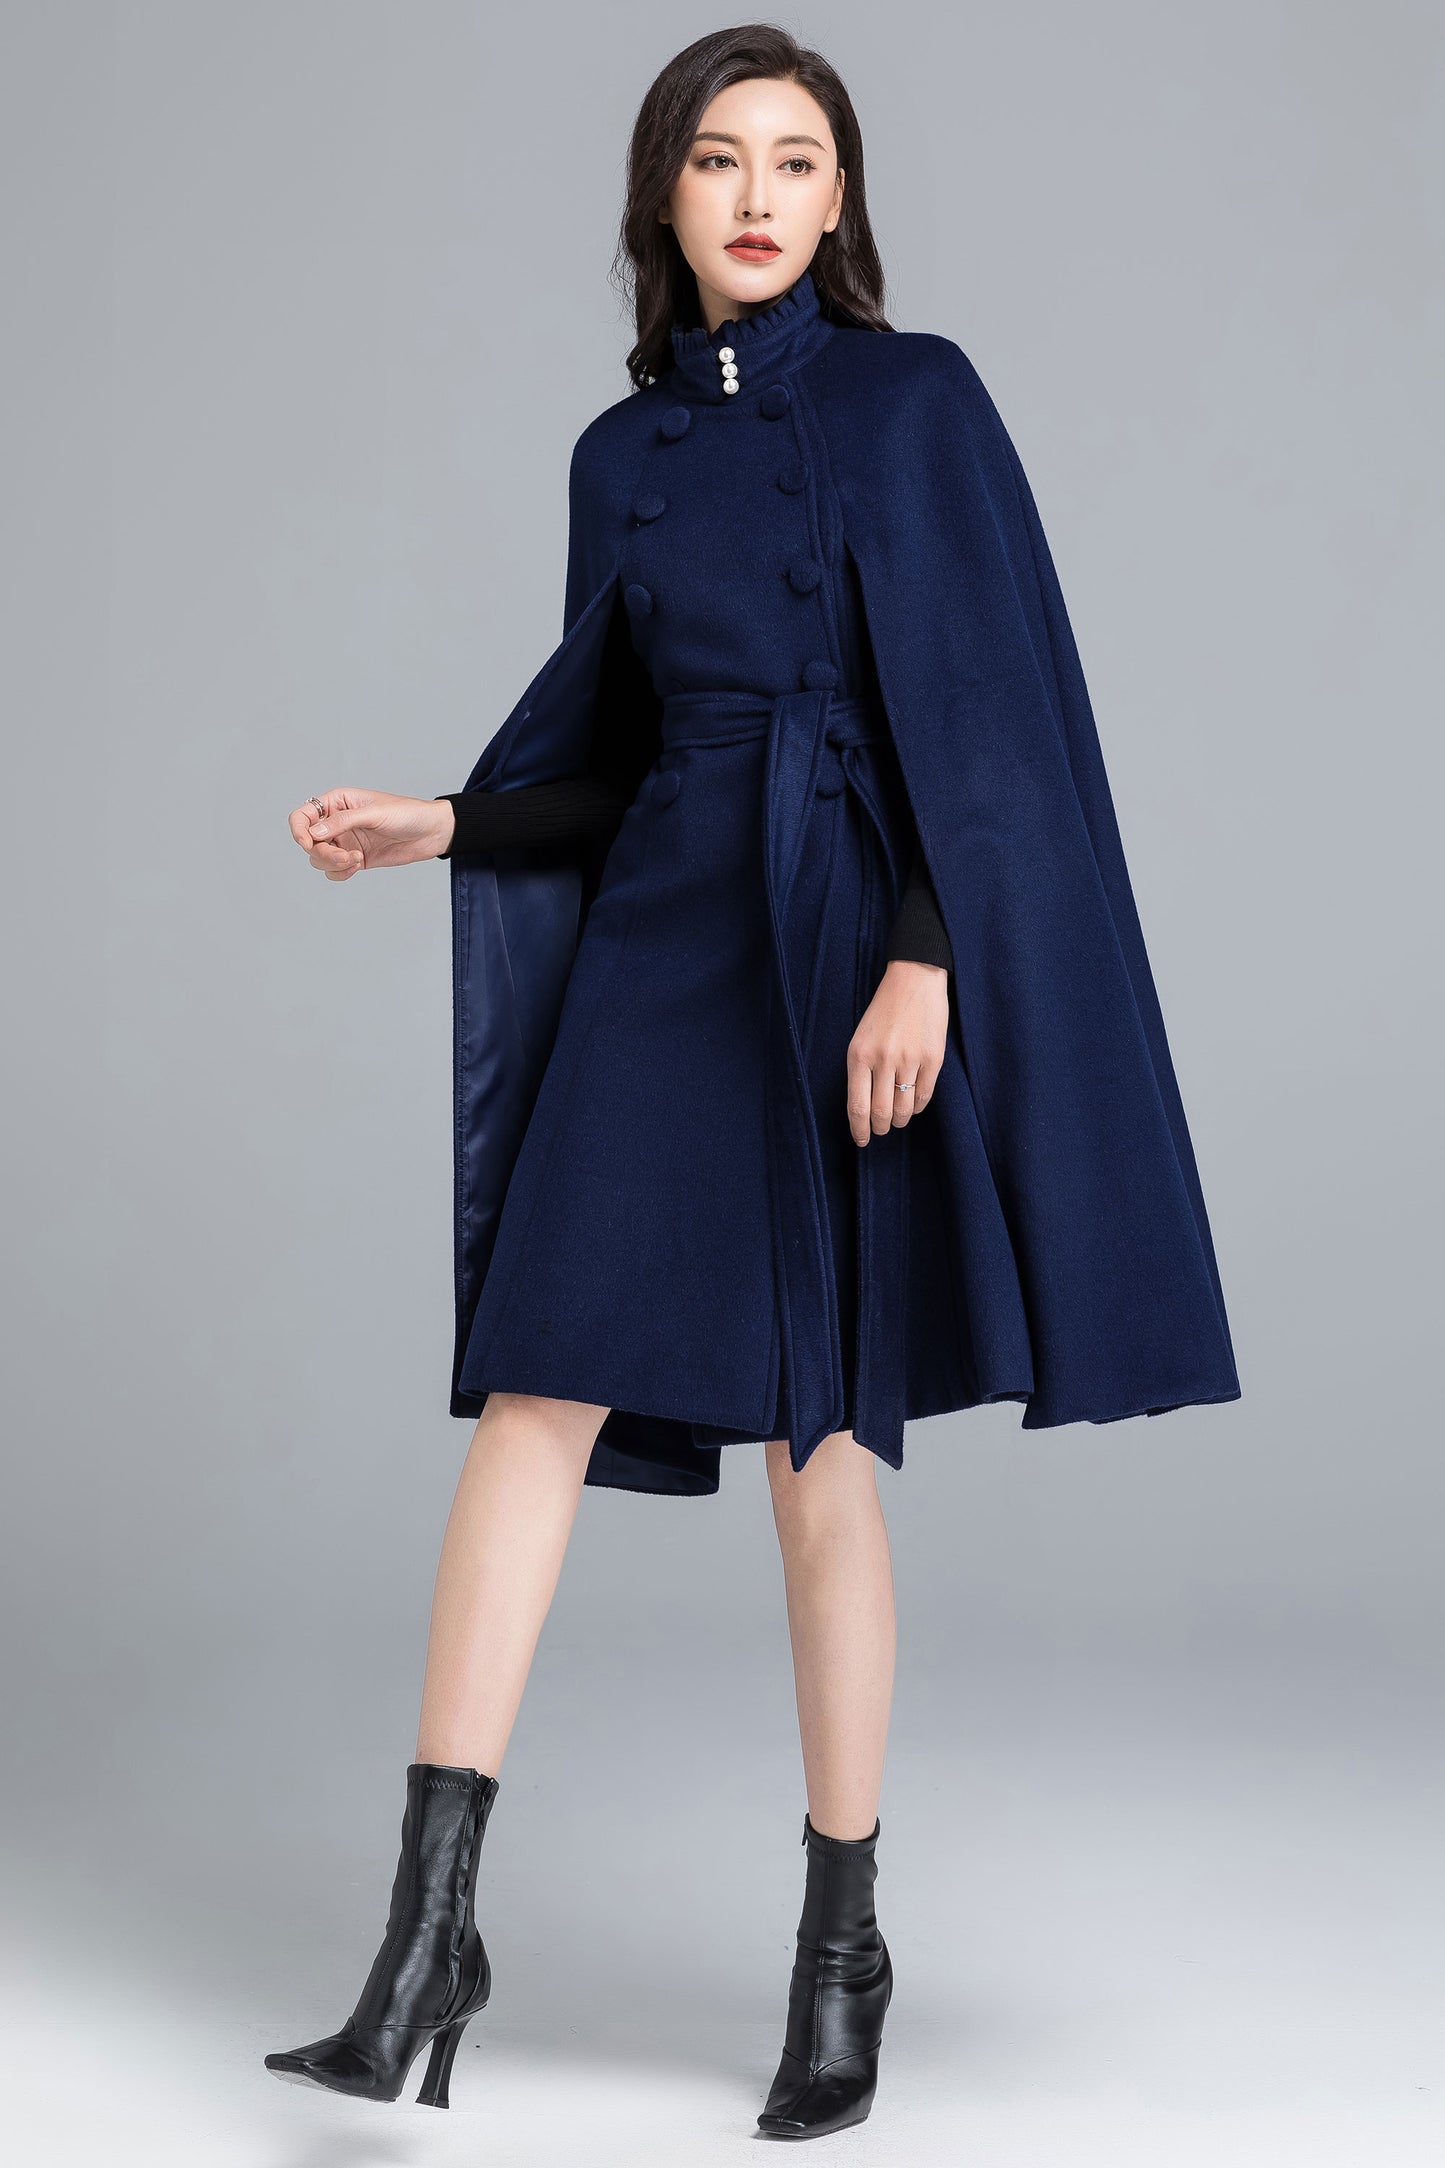 Winter Wool Cape Coat Women, Long Wool Cape with stand collar 2487